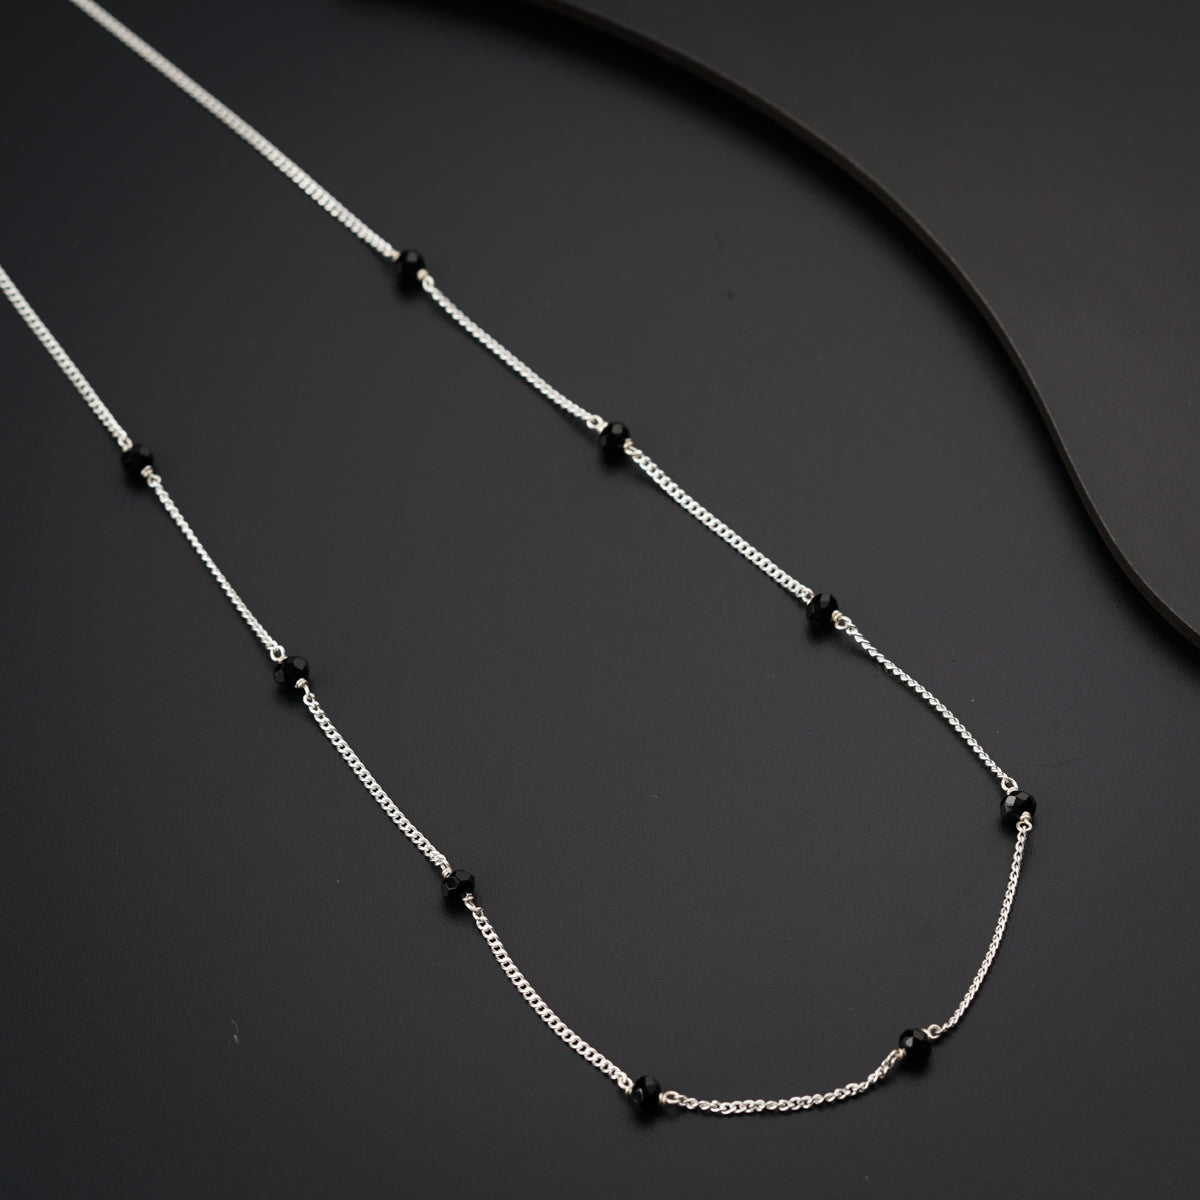 a black and white necklace on a black surface